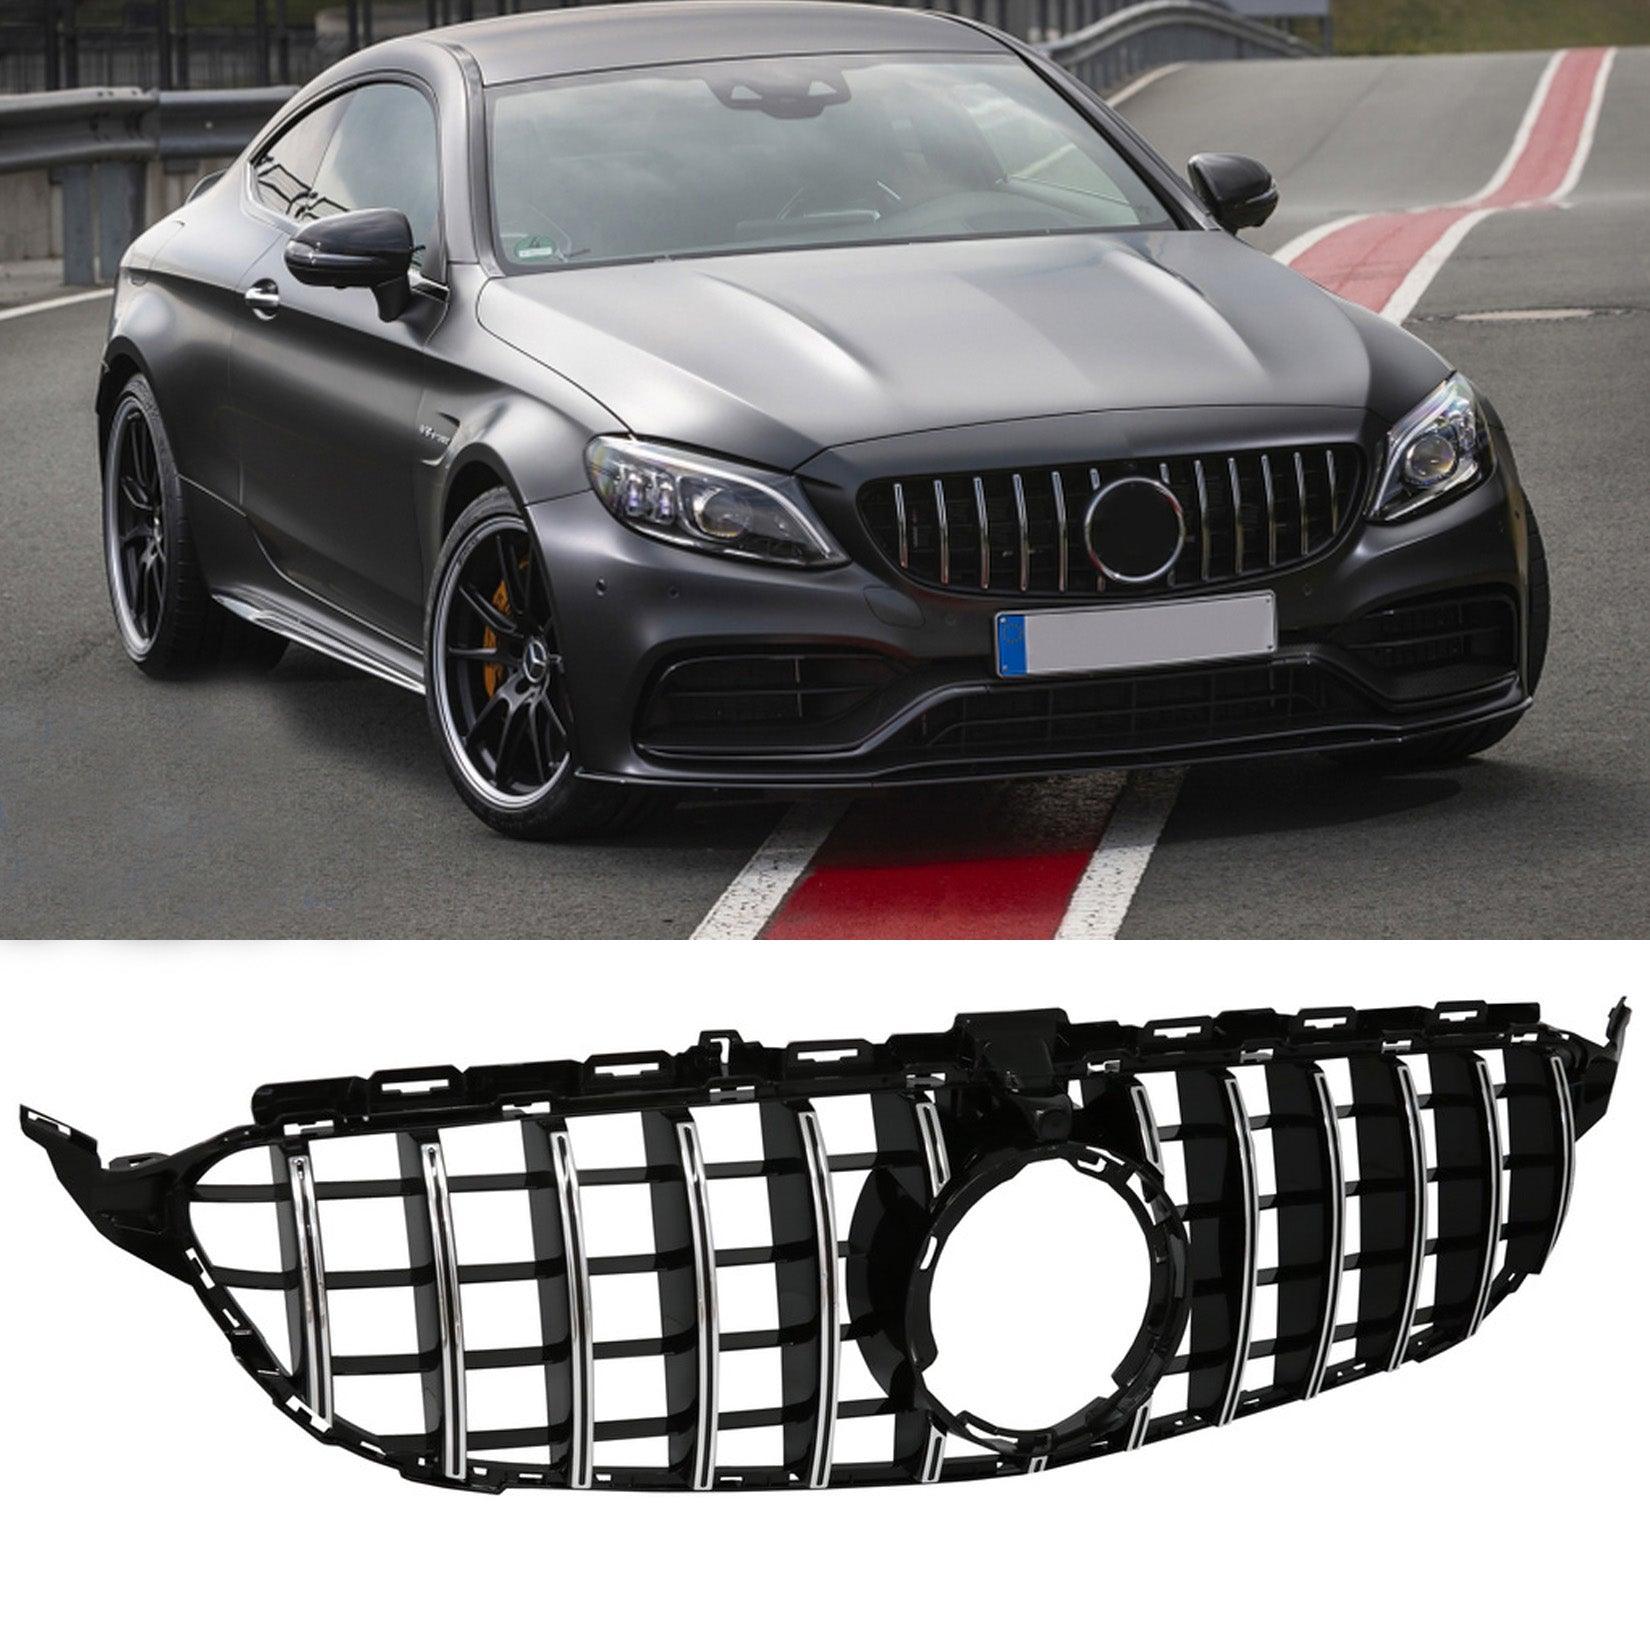 MERCEDES C-CLASS W205 FACELIFT 2018-2020 - FRONT GRILL - PANAMERICANA GT-R STYLE - SILVER - RisperStyling